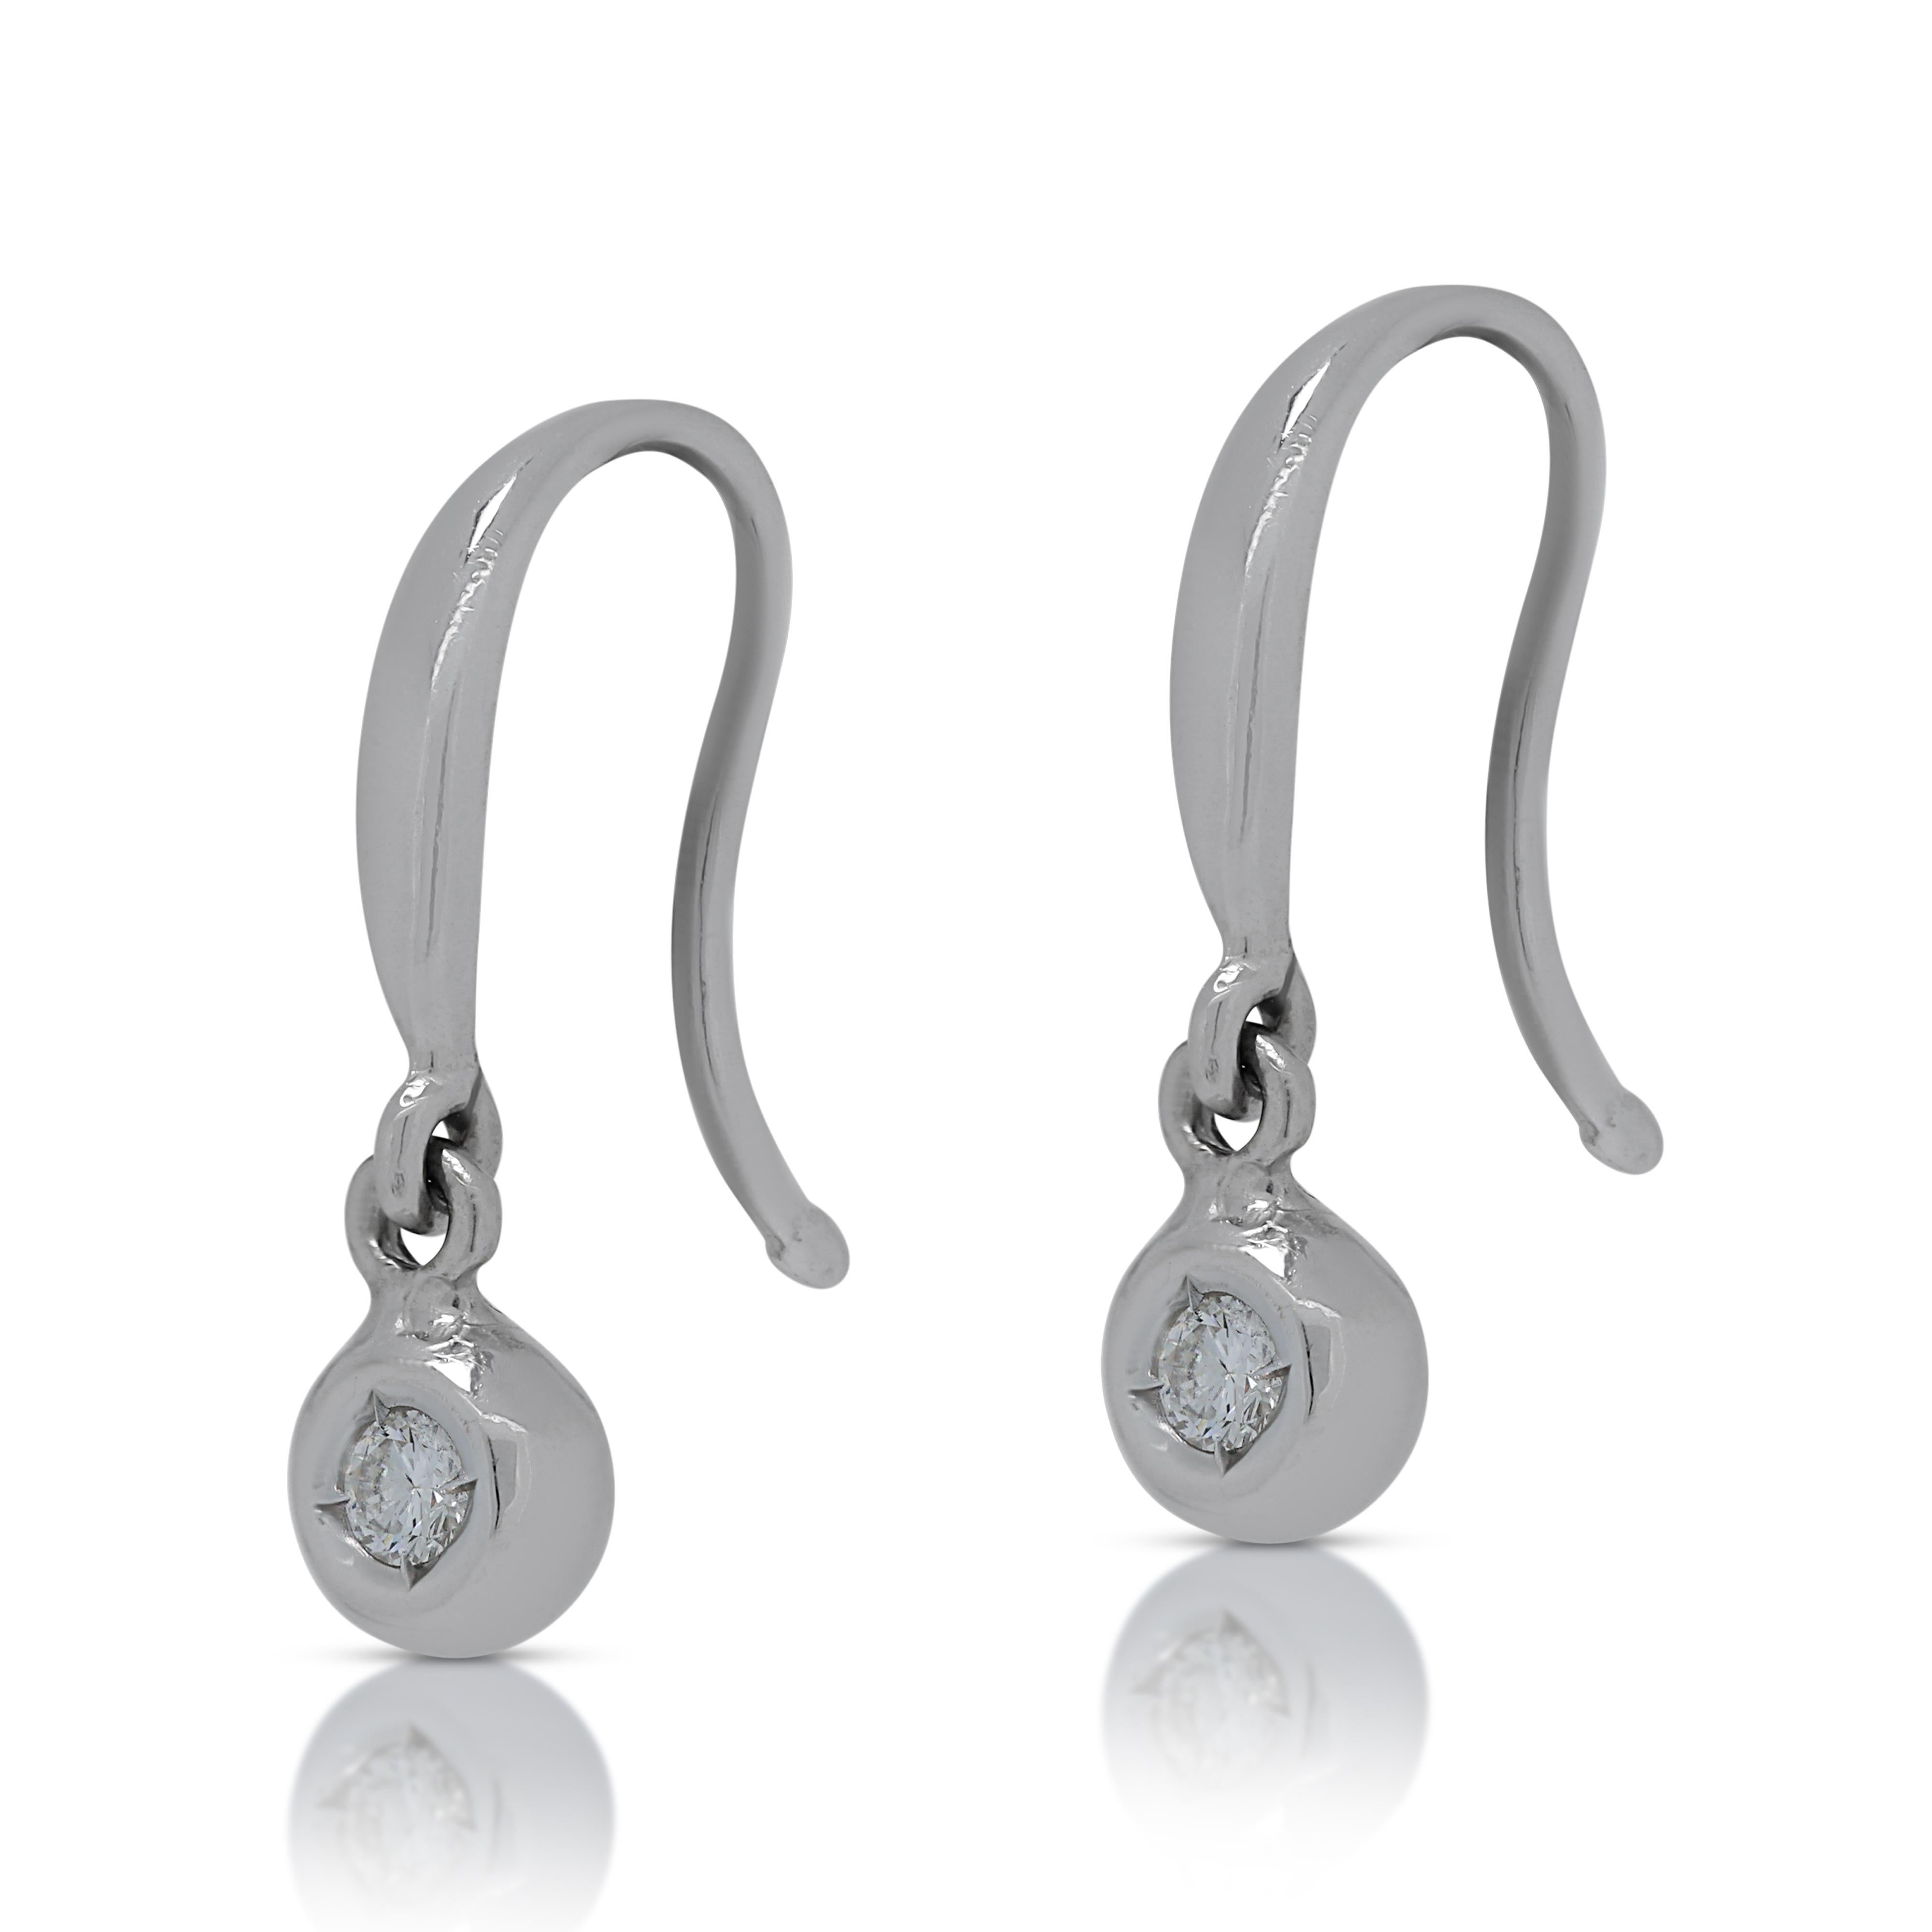 Lovely 0.04ct Diamonds Hook Earrings in 18K White Gold In Excellent Condition For Sale In רמת גן, IL